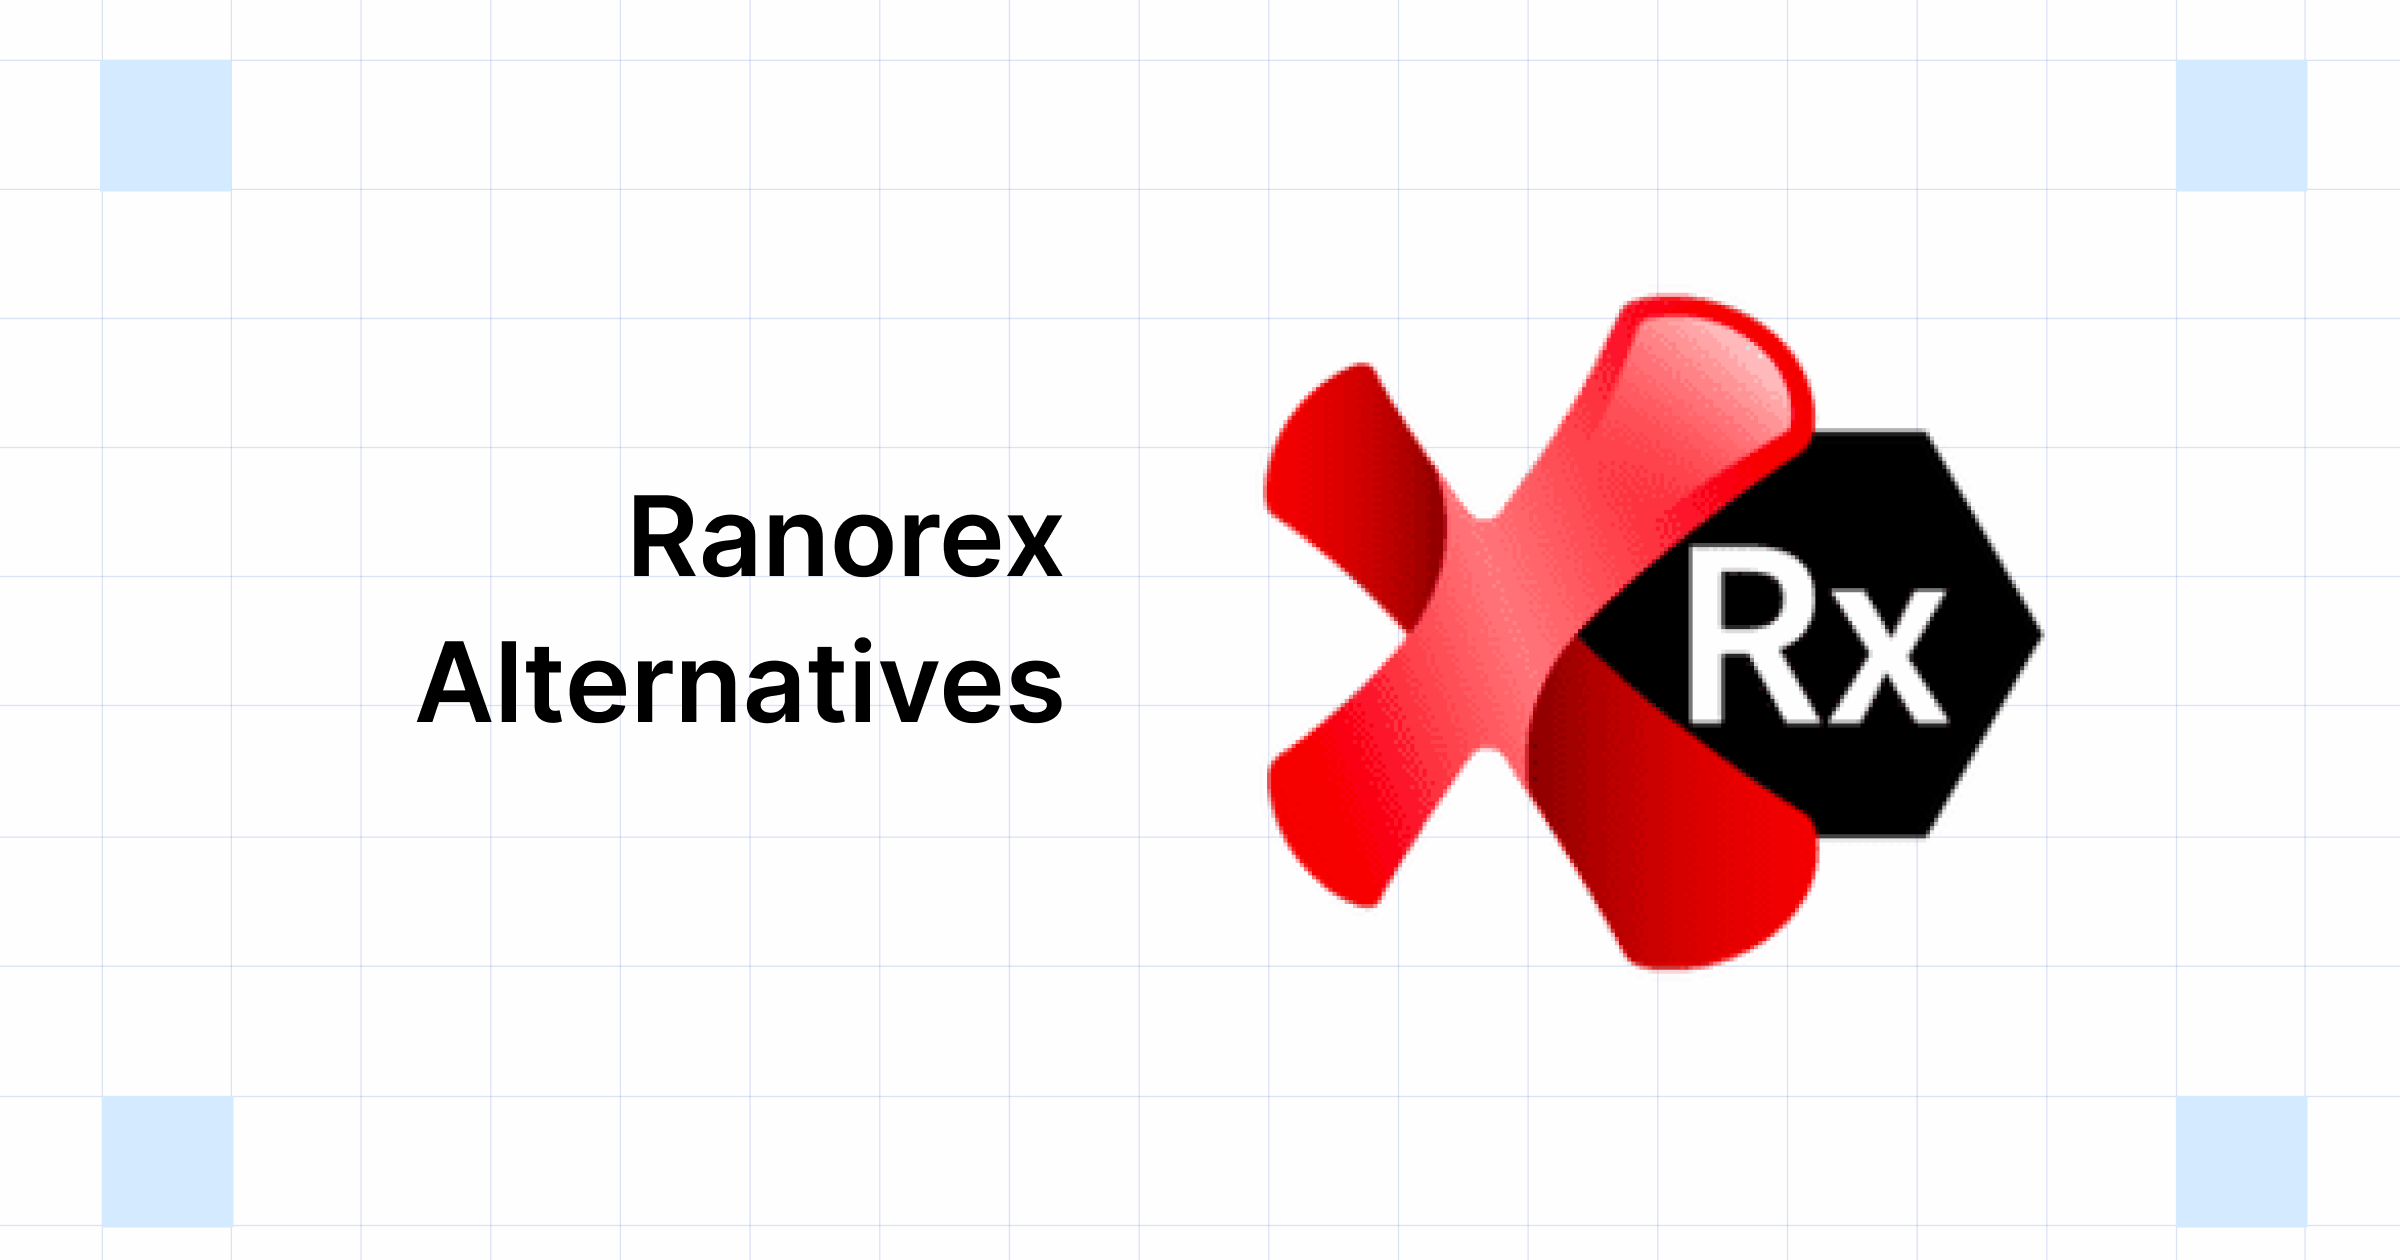 Top 10 Ranorex Alternatives List to Look For